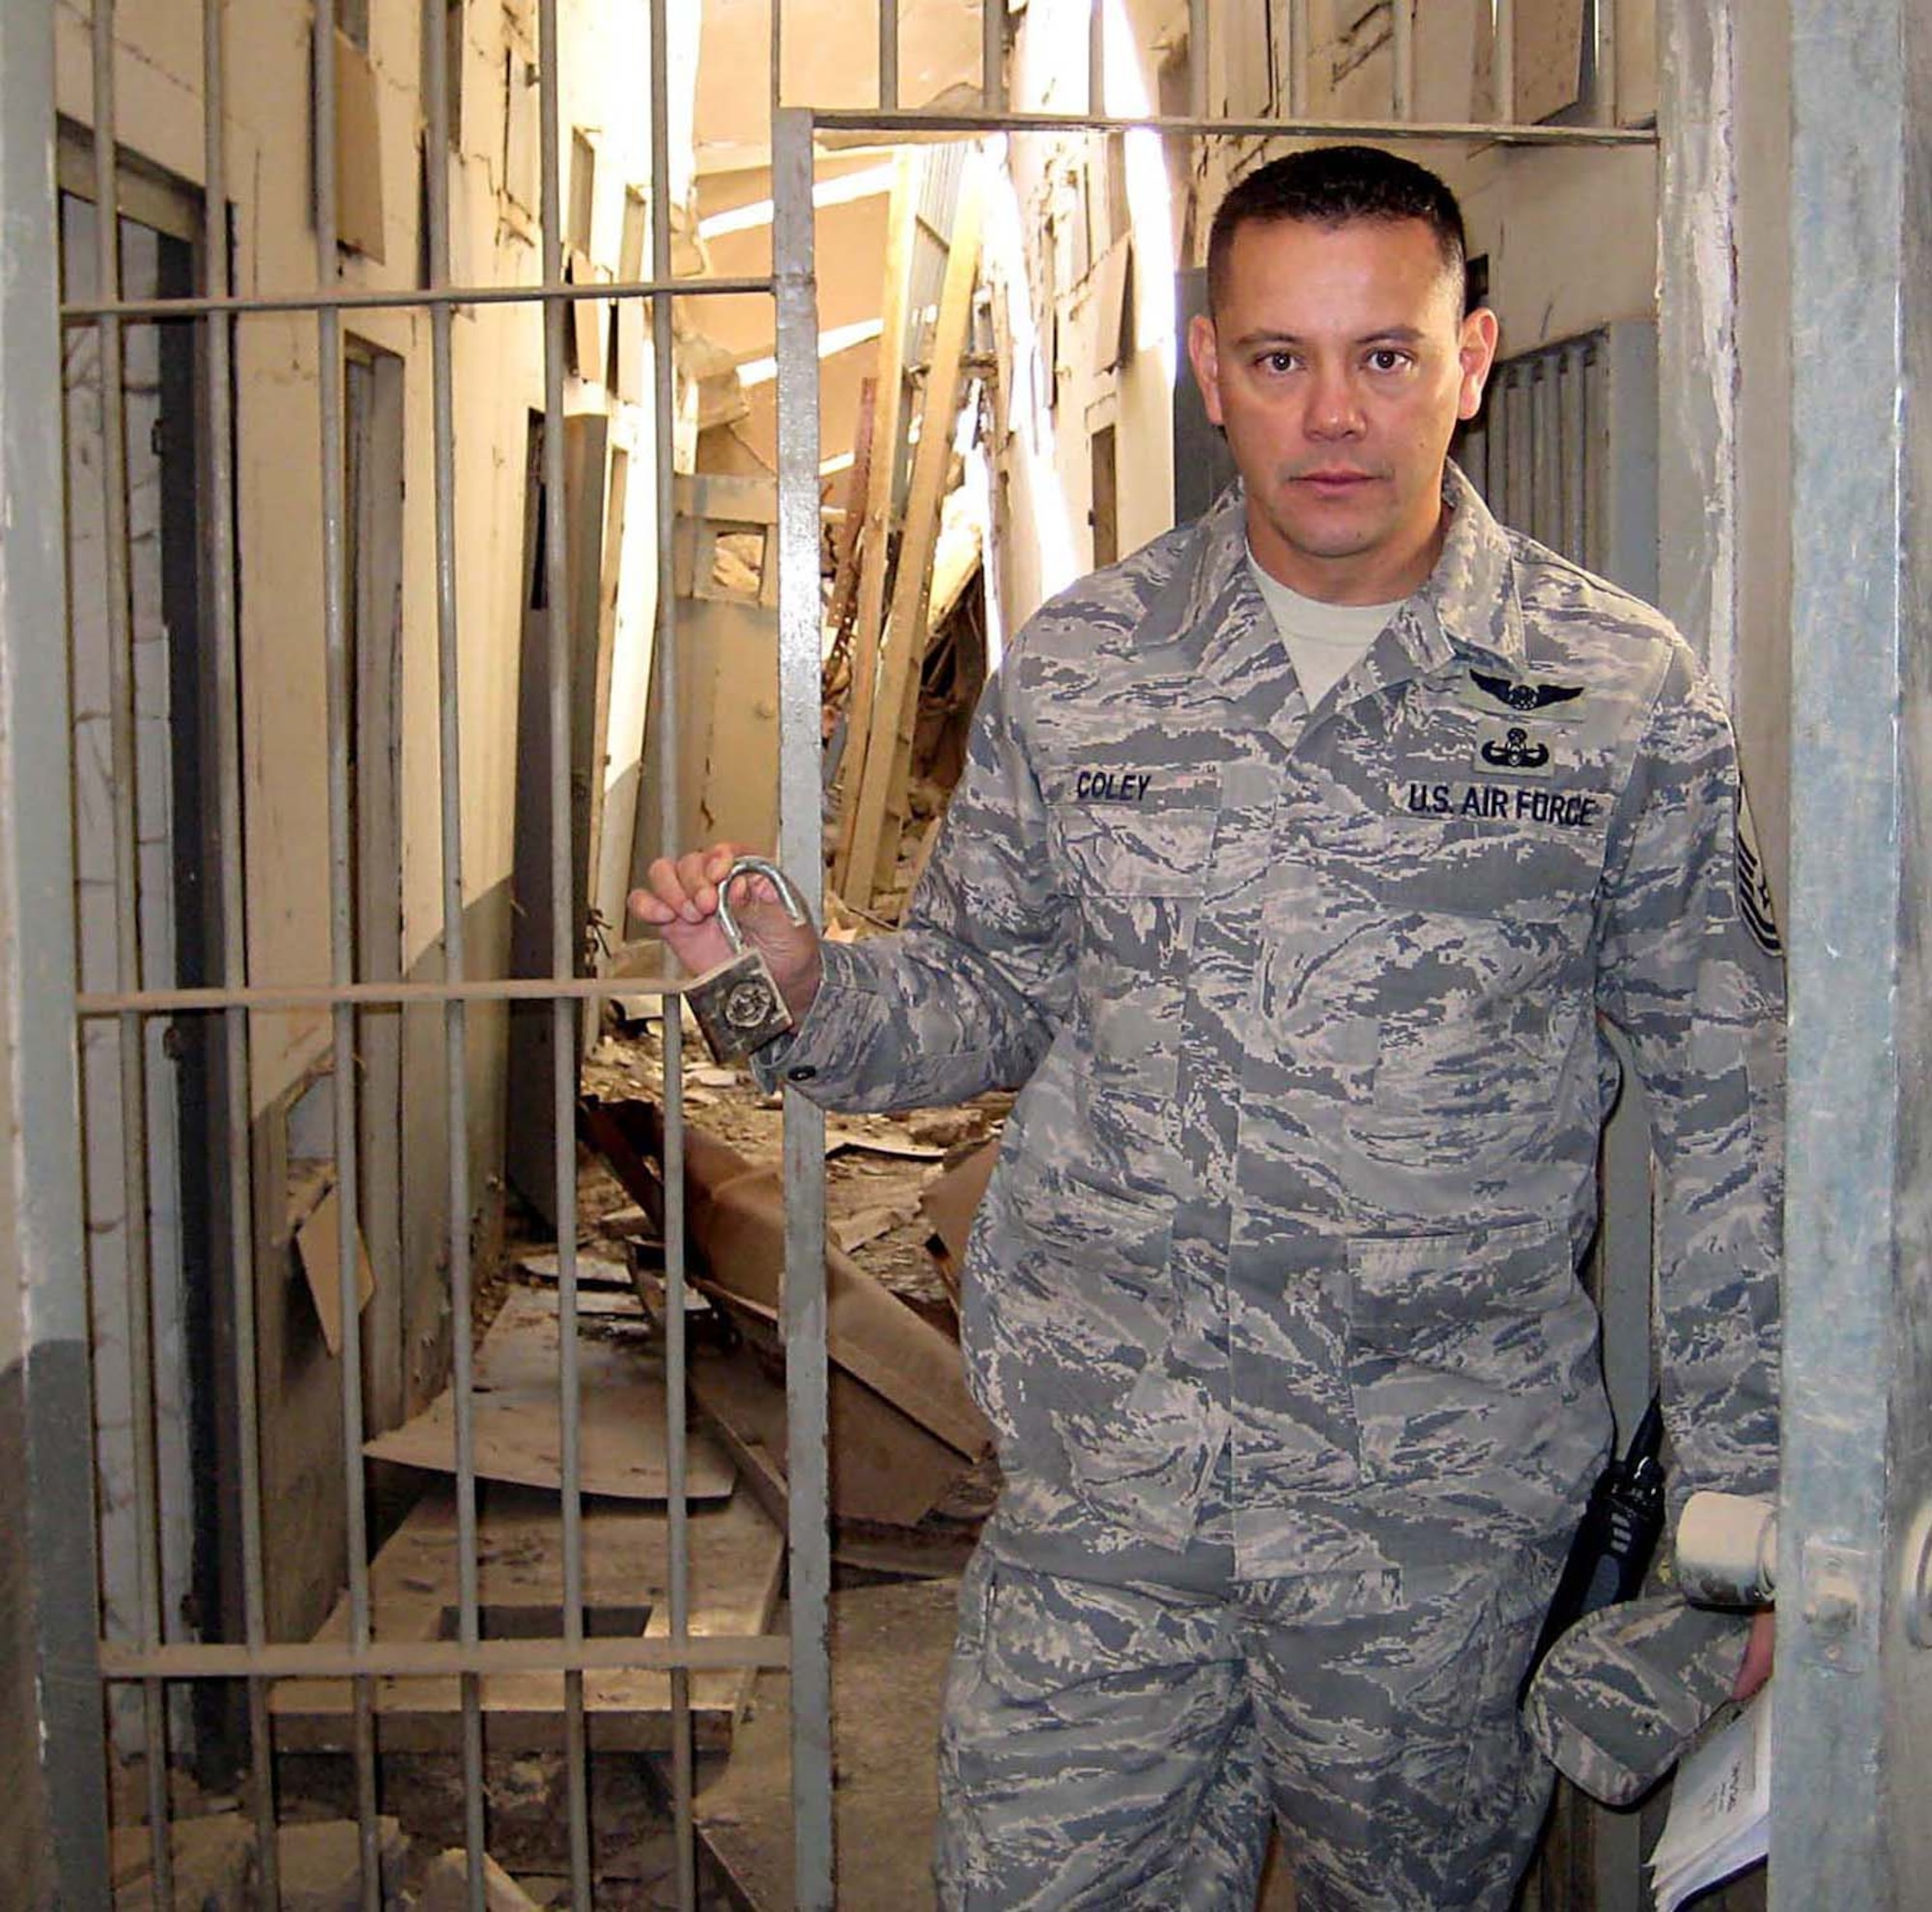 A relatively undisturbed lock in a bombed out prison in Southwest Aisa is held by Senior Master Sgt. James Coley, 446th Civil Engineer Squadron explosive ordnance disposal, McChord Air Force Base, Wash. Sergeant Coley earned the Bronze Star for his service while deployed Iraq. (Courtesy photo/Senior Master Sgt. James Coley)